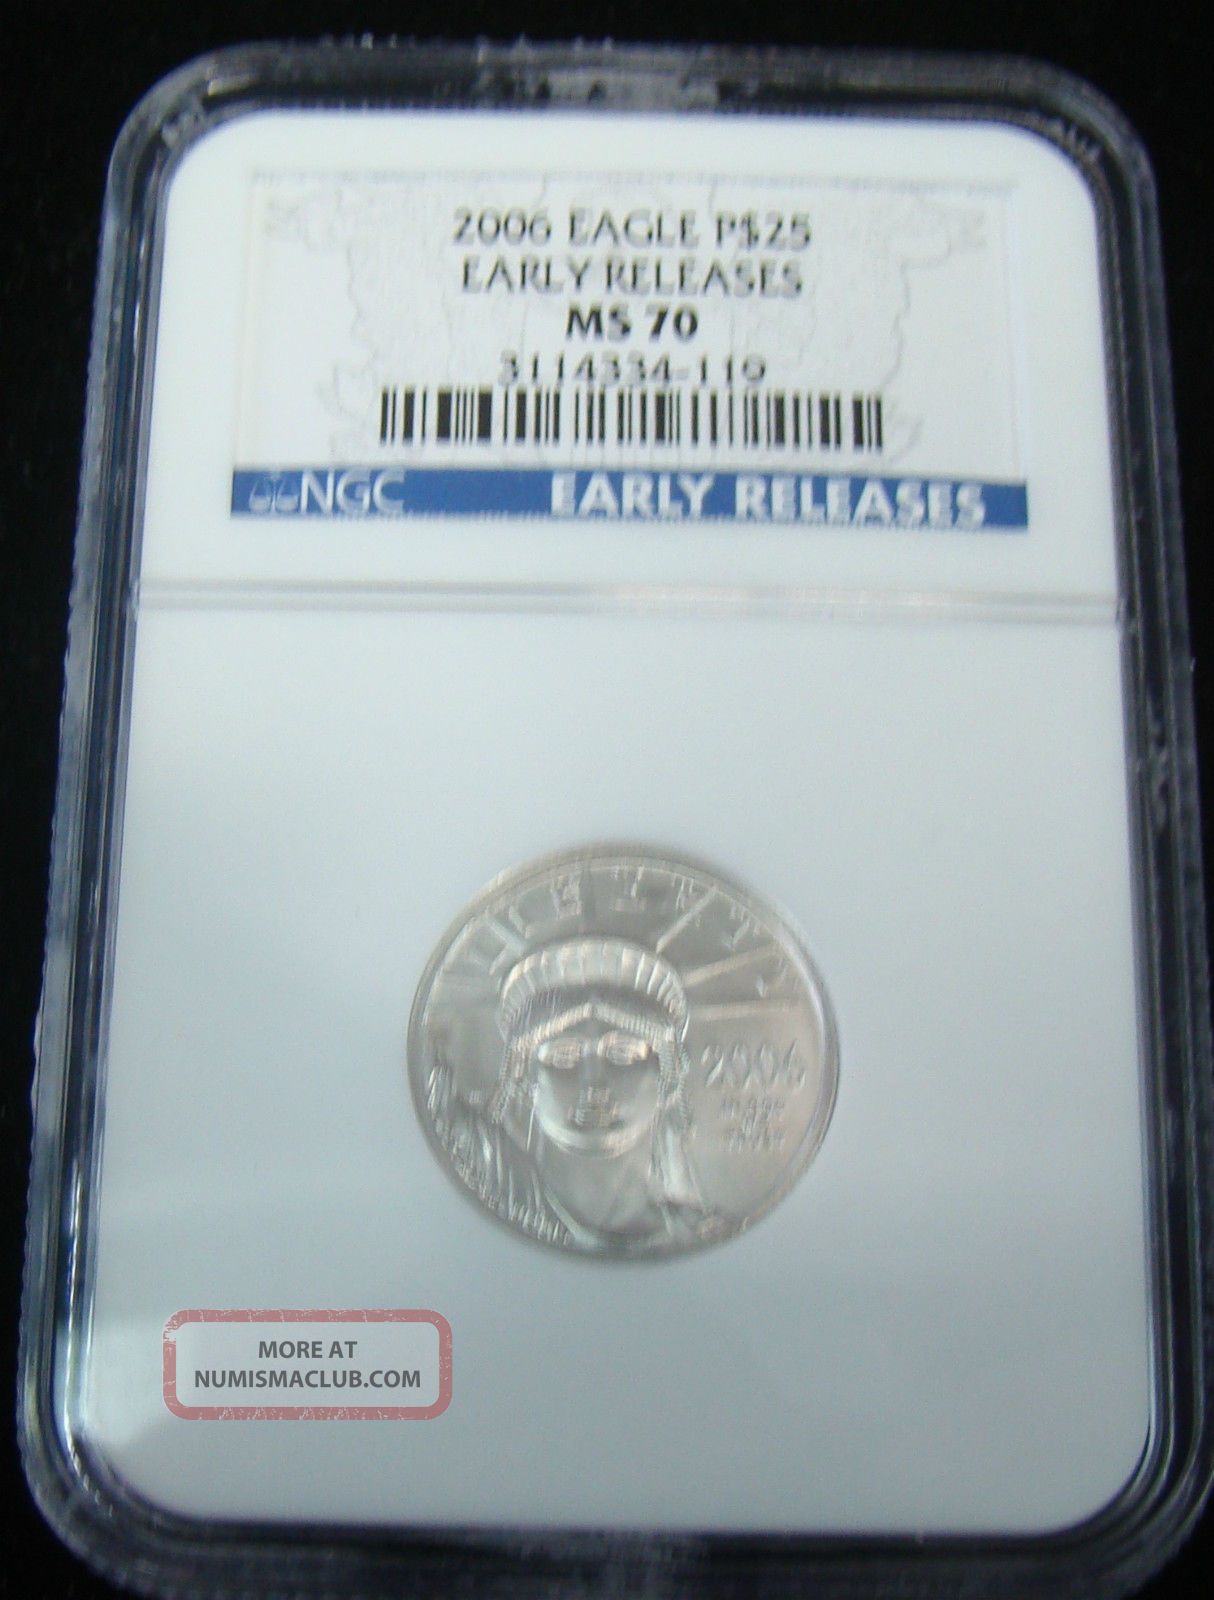 2006 $25 Platinum Liberty Eagle Coin Ngc Ms 70 - 1/4 Oz. . 9995 - Early